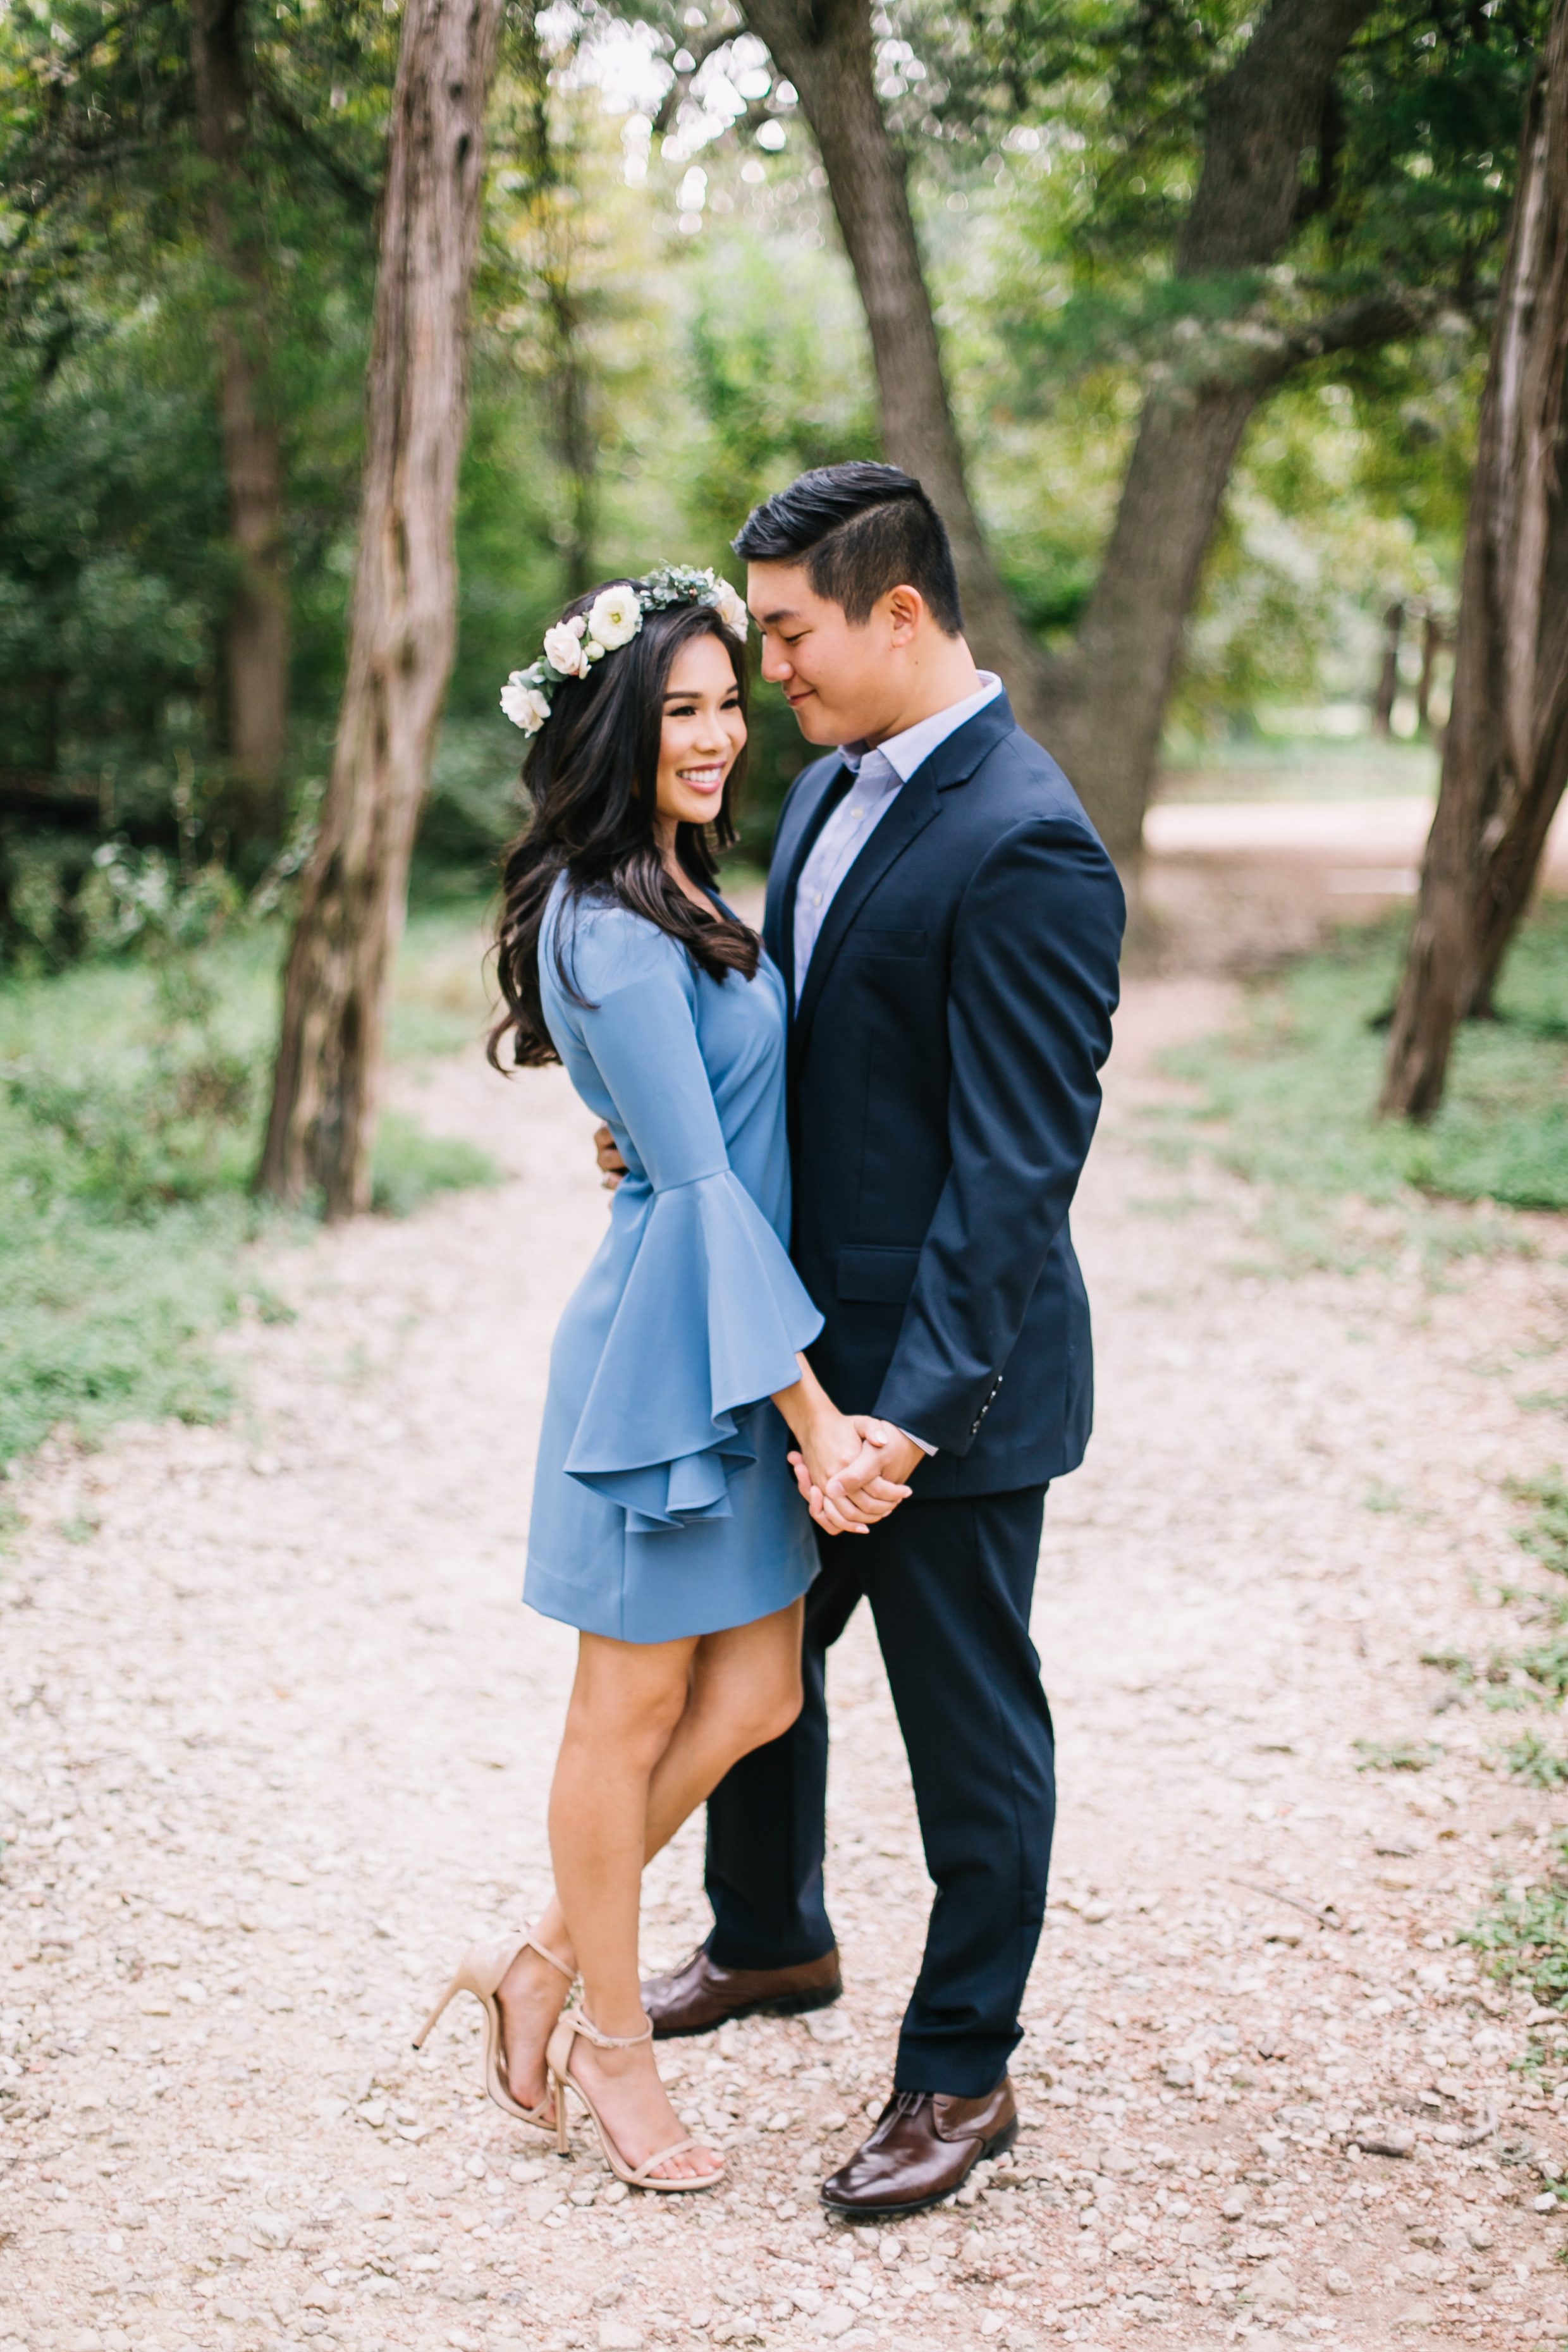 styled,shoot,engagement,wedding,rose,flower,crown,austin,texas,photographer,wedding,jcrew,suit,style,me,pretty,milly,nicole,bell,sleeve,bellsleeved,dress,periwinkle,stuart,weitzman,whimsical,fairy,woods,nature,photograhy,bride,groom,navy,blue,brandon,hill,photography,